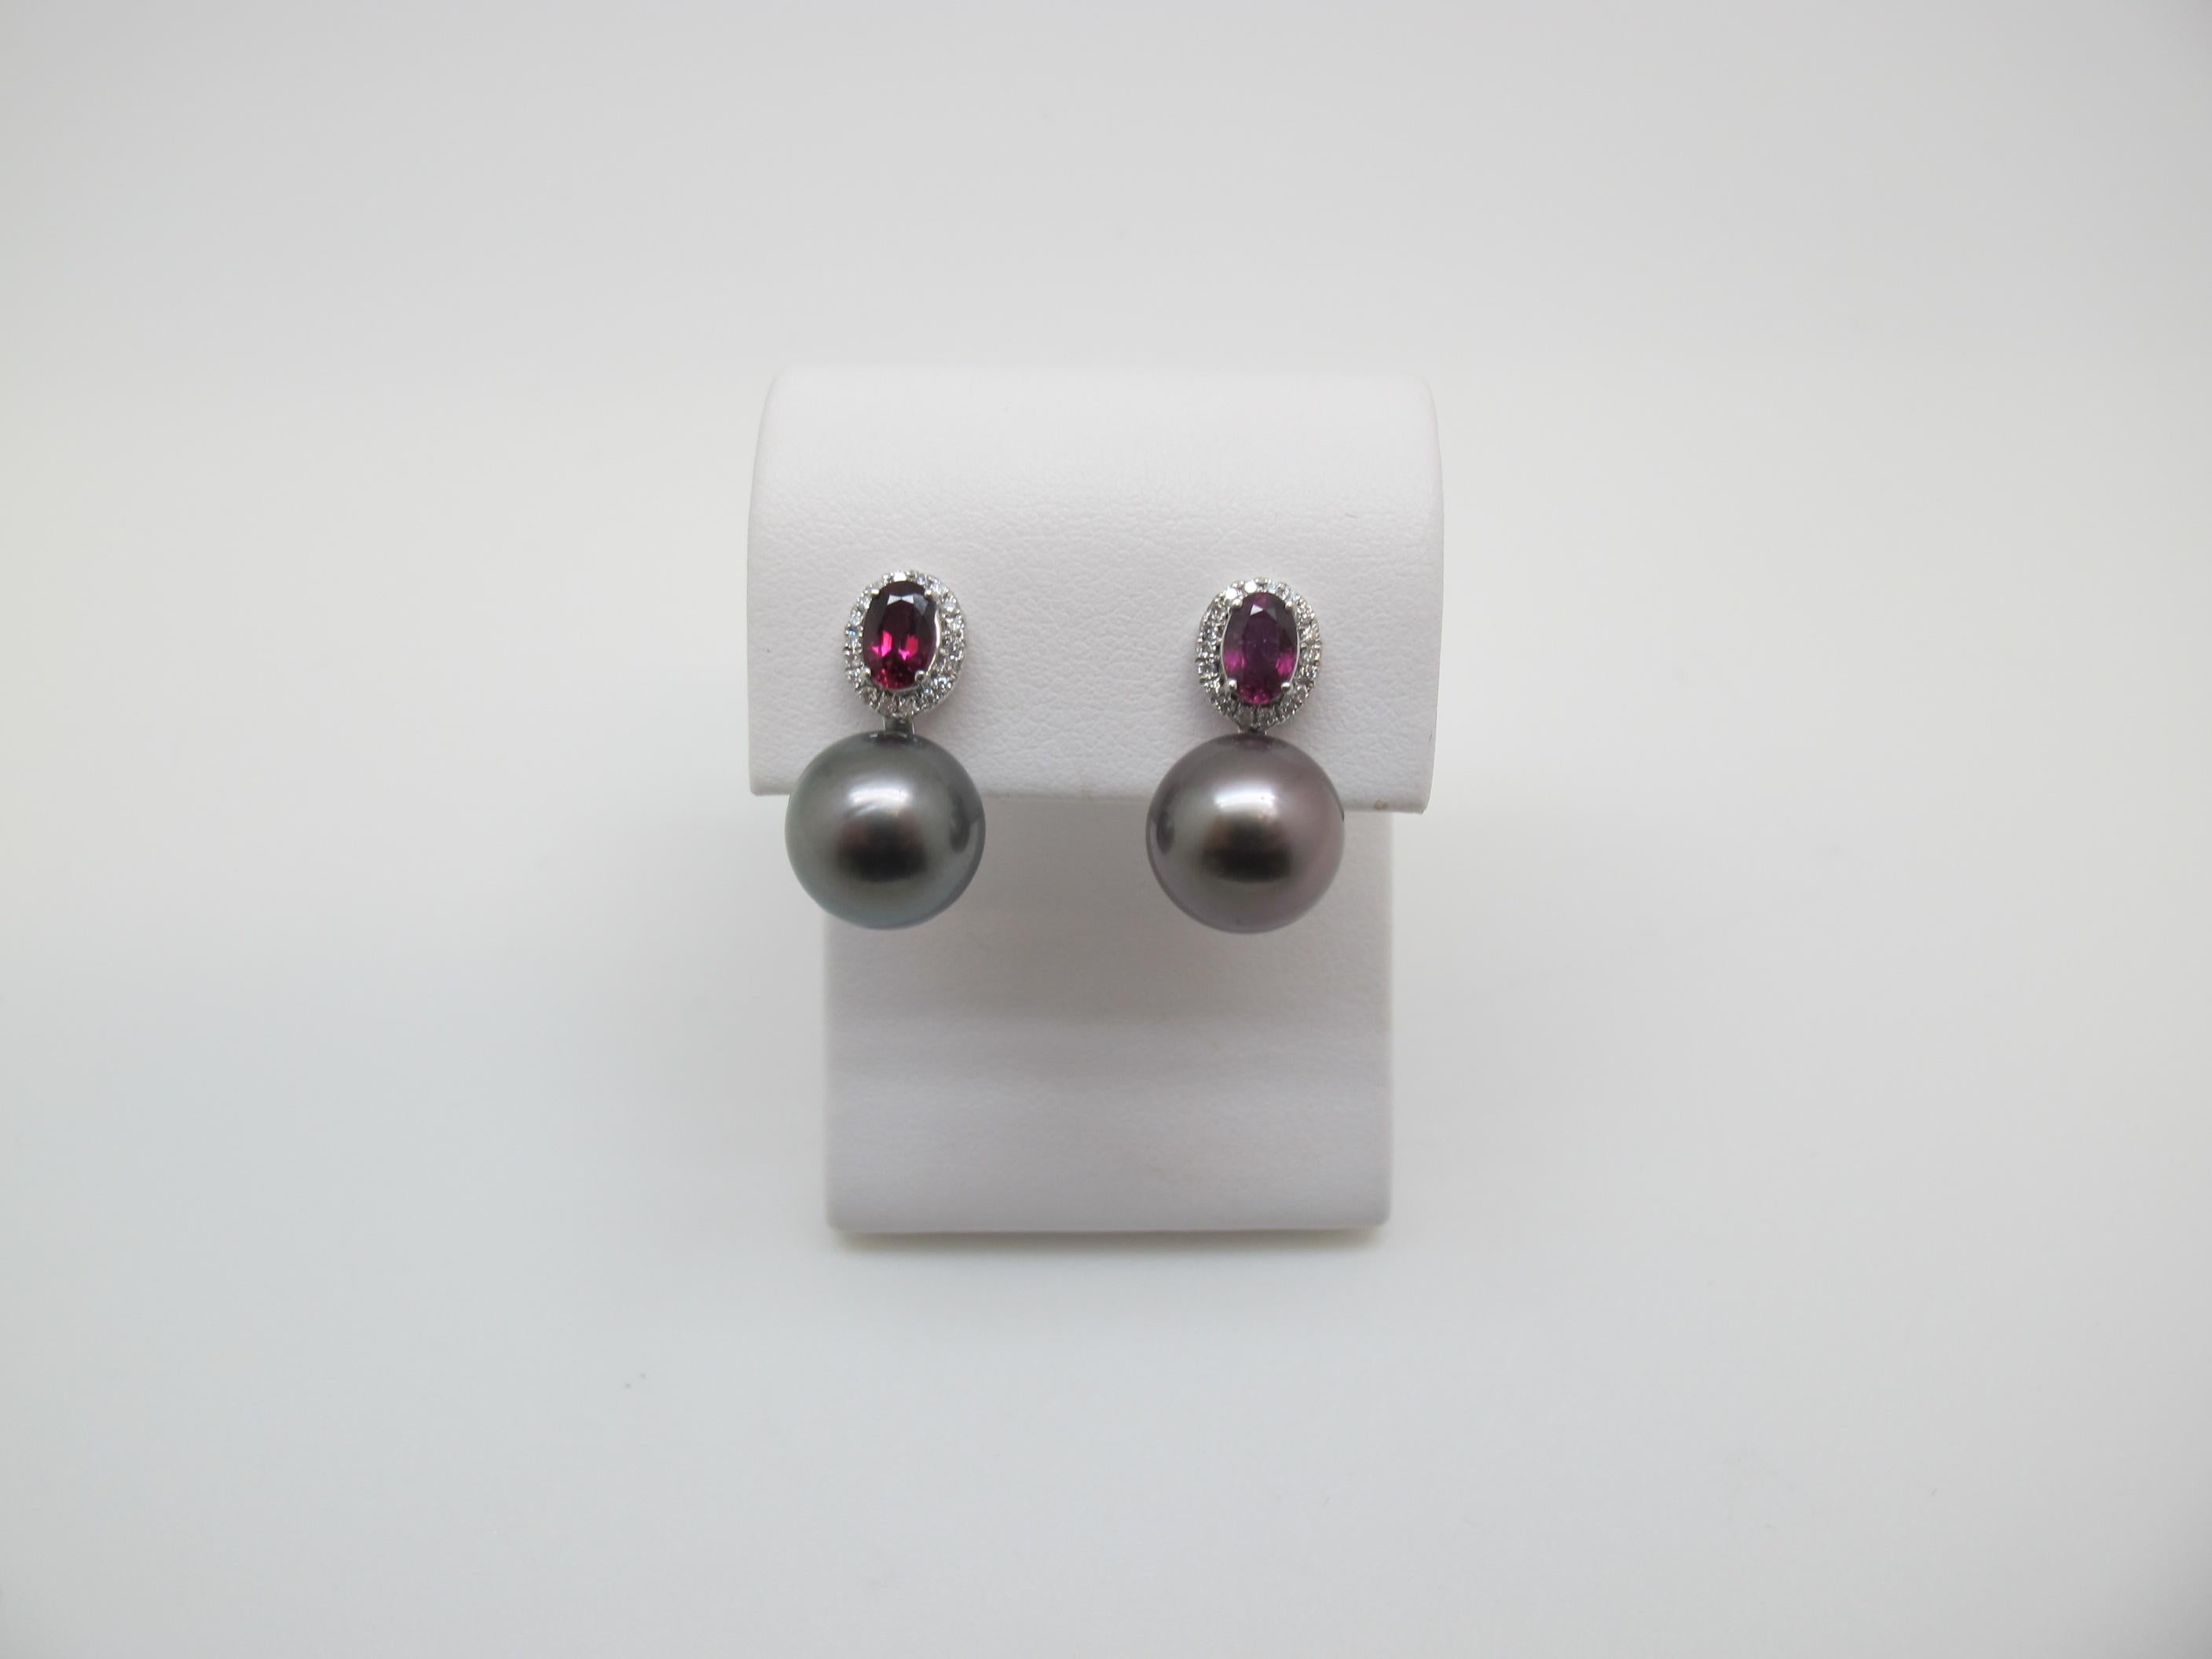 These impeccable pearl drop earrings display dramatic colors with elegant perfection! Featuring bright red rubies surrounded by a halo of diamonds and large, black Tahitian pearls, these are earrings to lust after! The rich color of the rubies